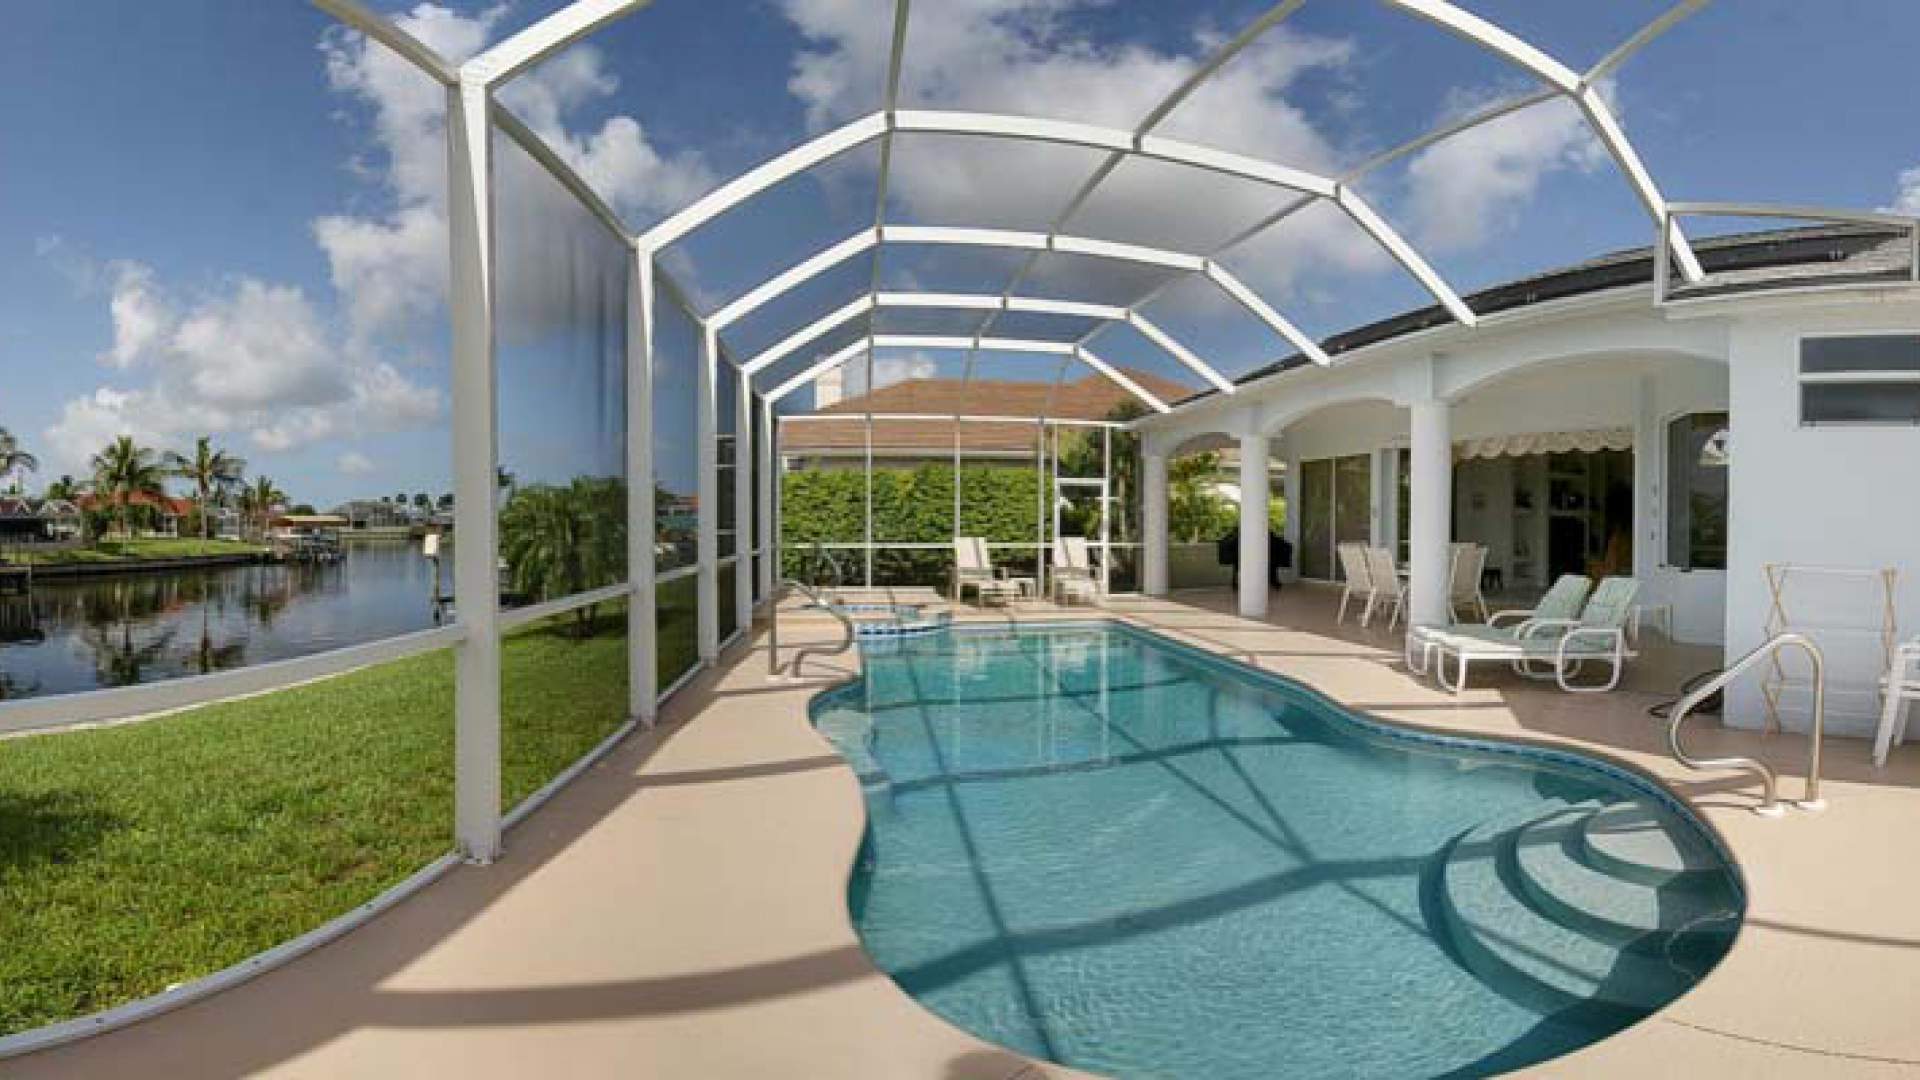 Pool and spa can be solar heated